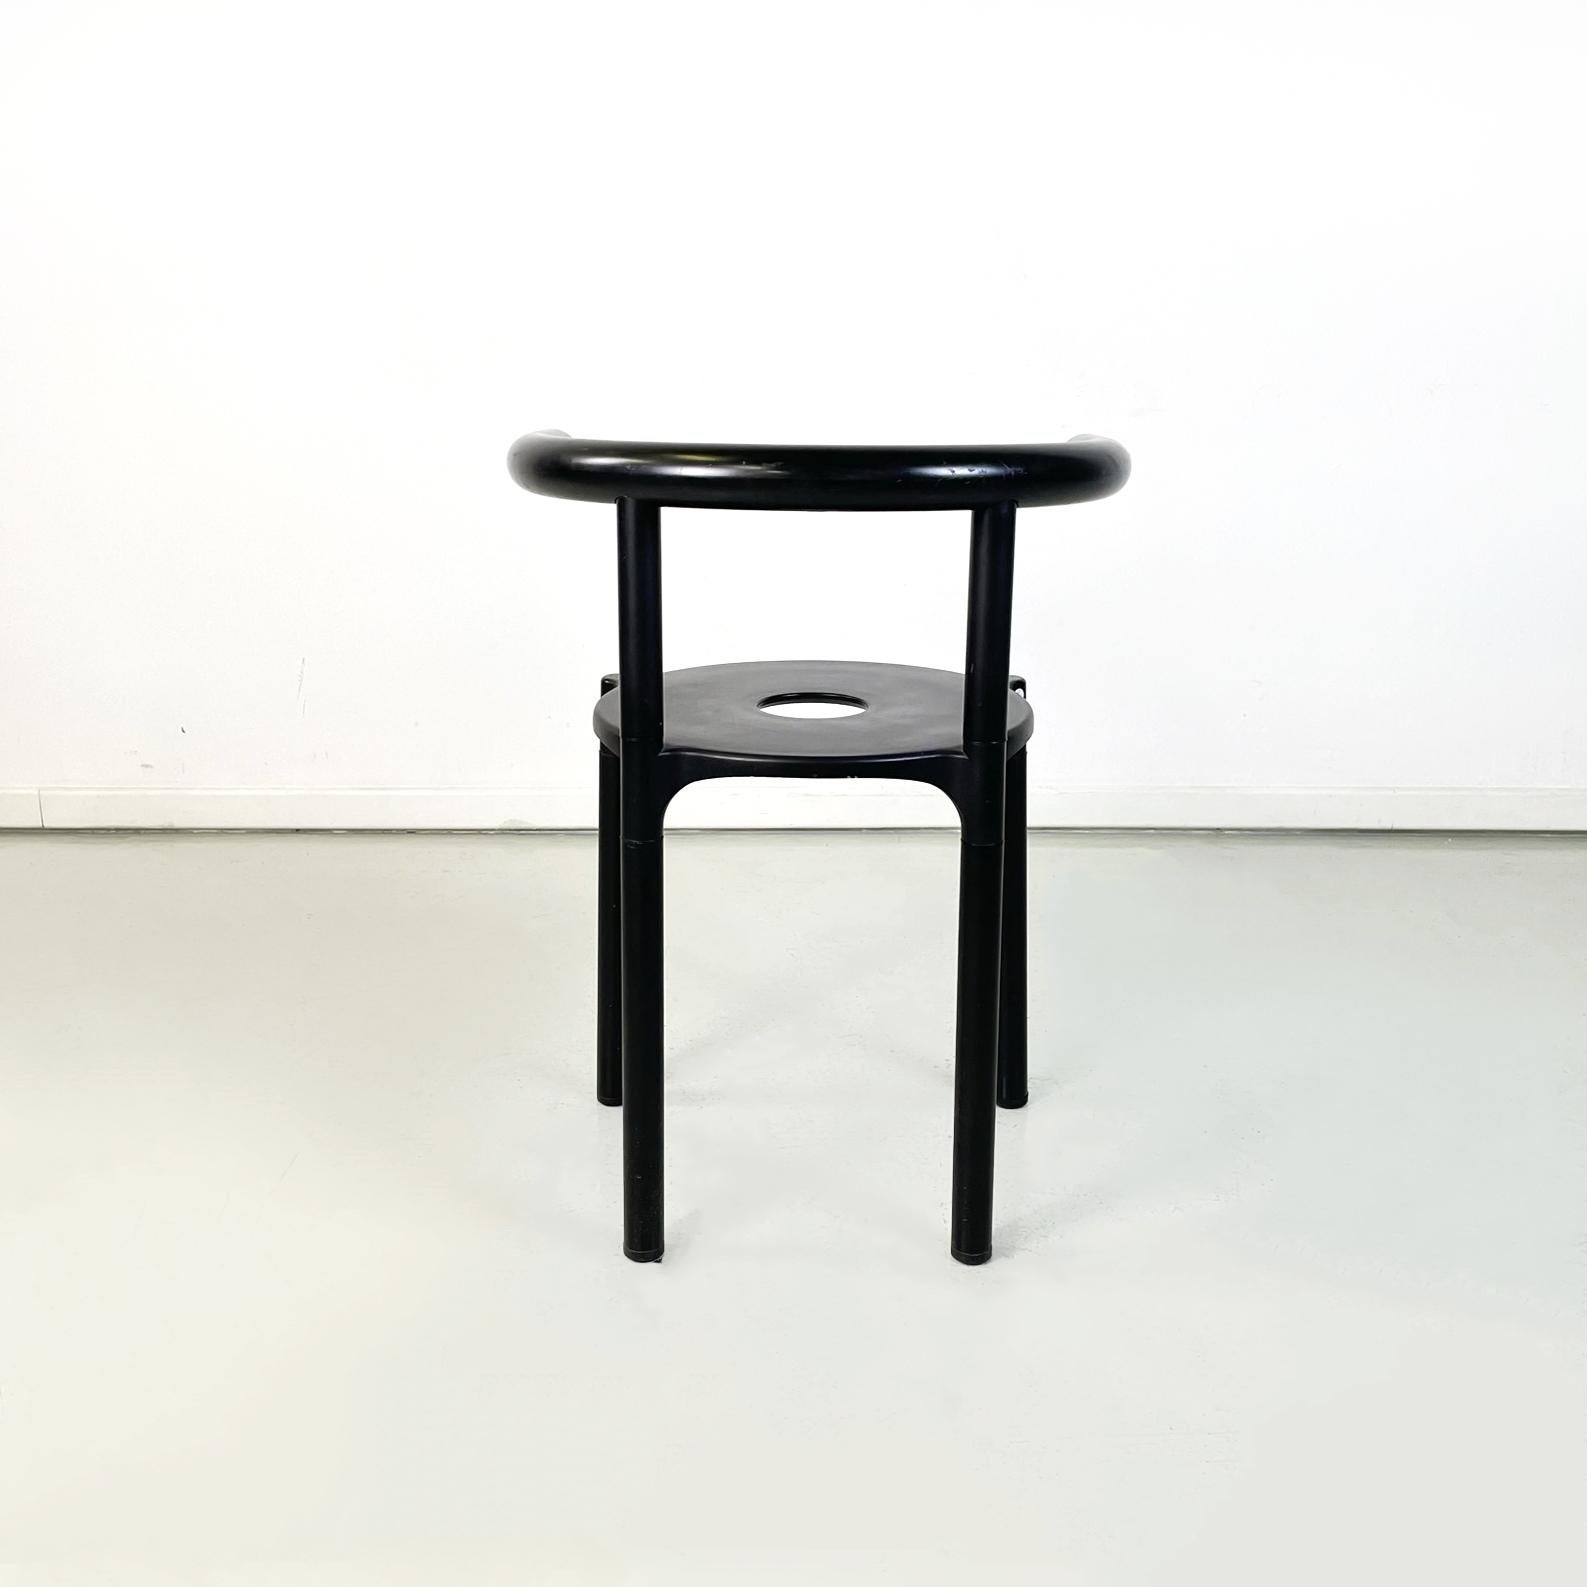 Late 20th Century Italian Modern Black Metal Plastic Chairs 4855 by Anna Castelli Kartell, 1990s For Sale